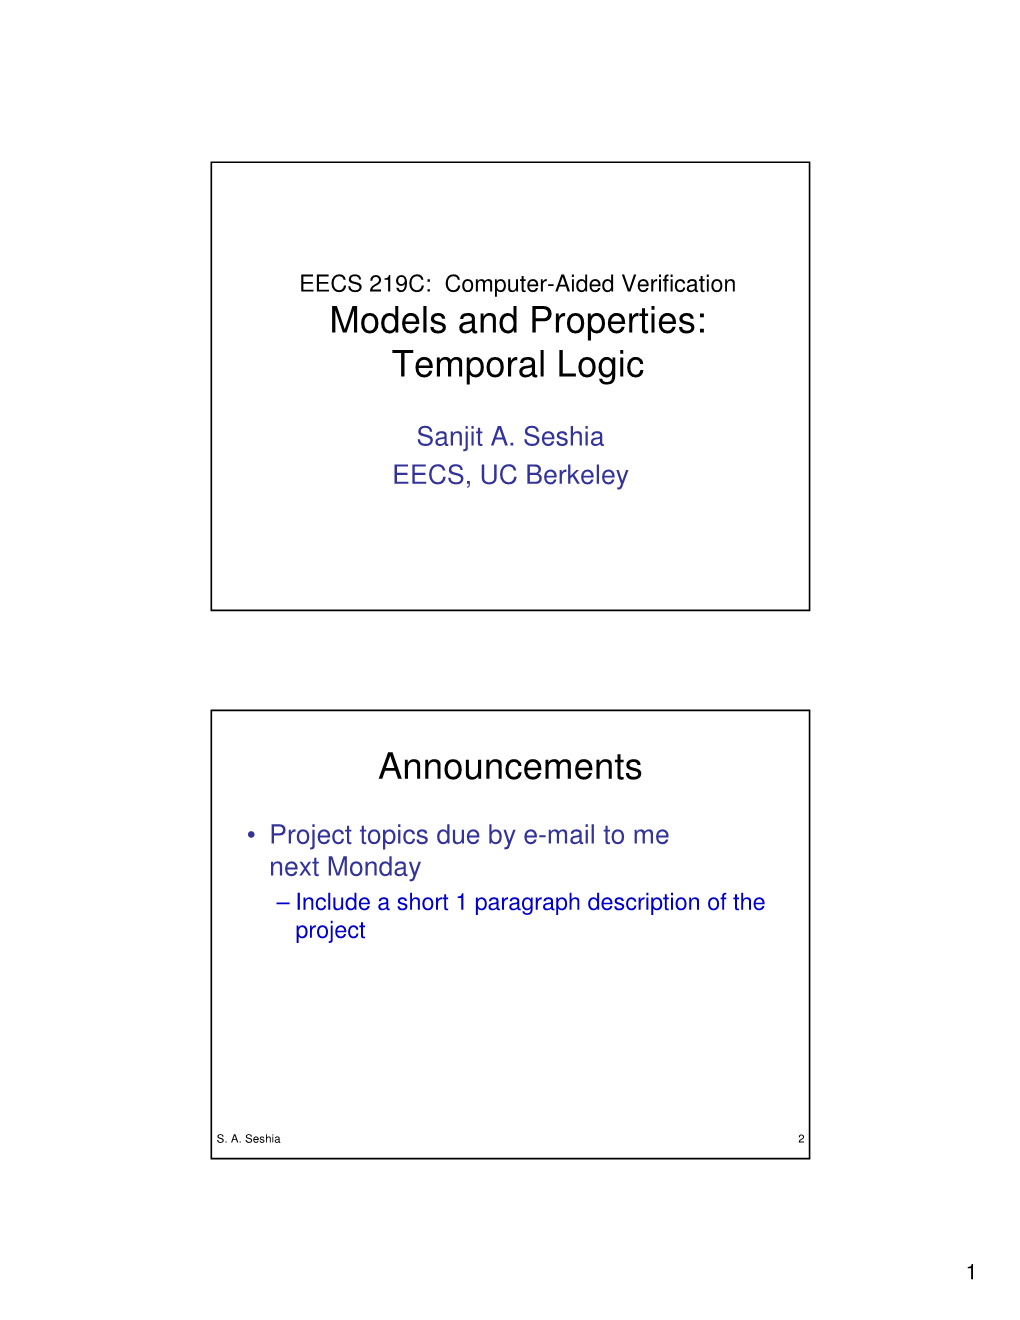 Models and Properties: Temporal Logic Announcements